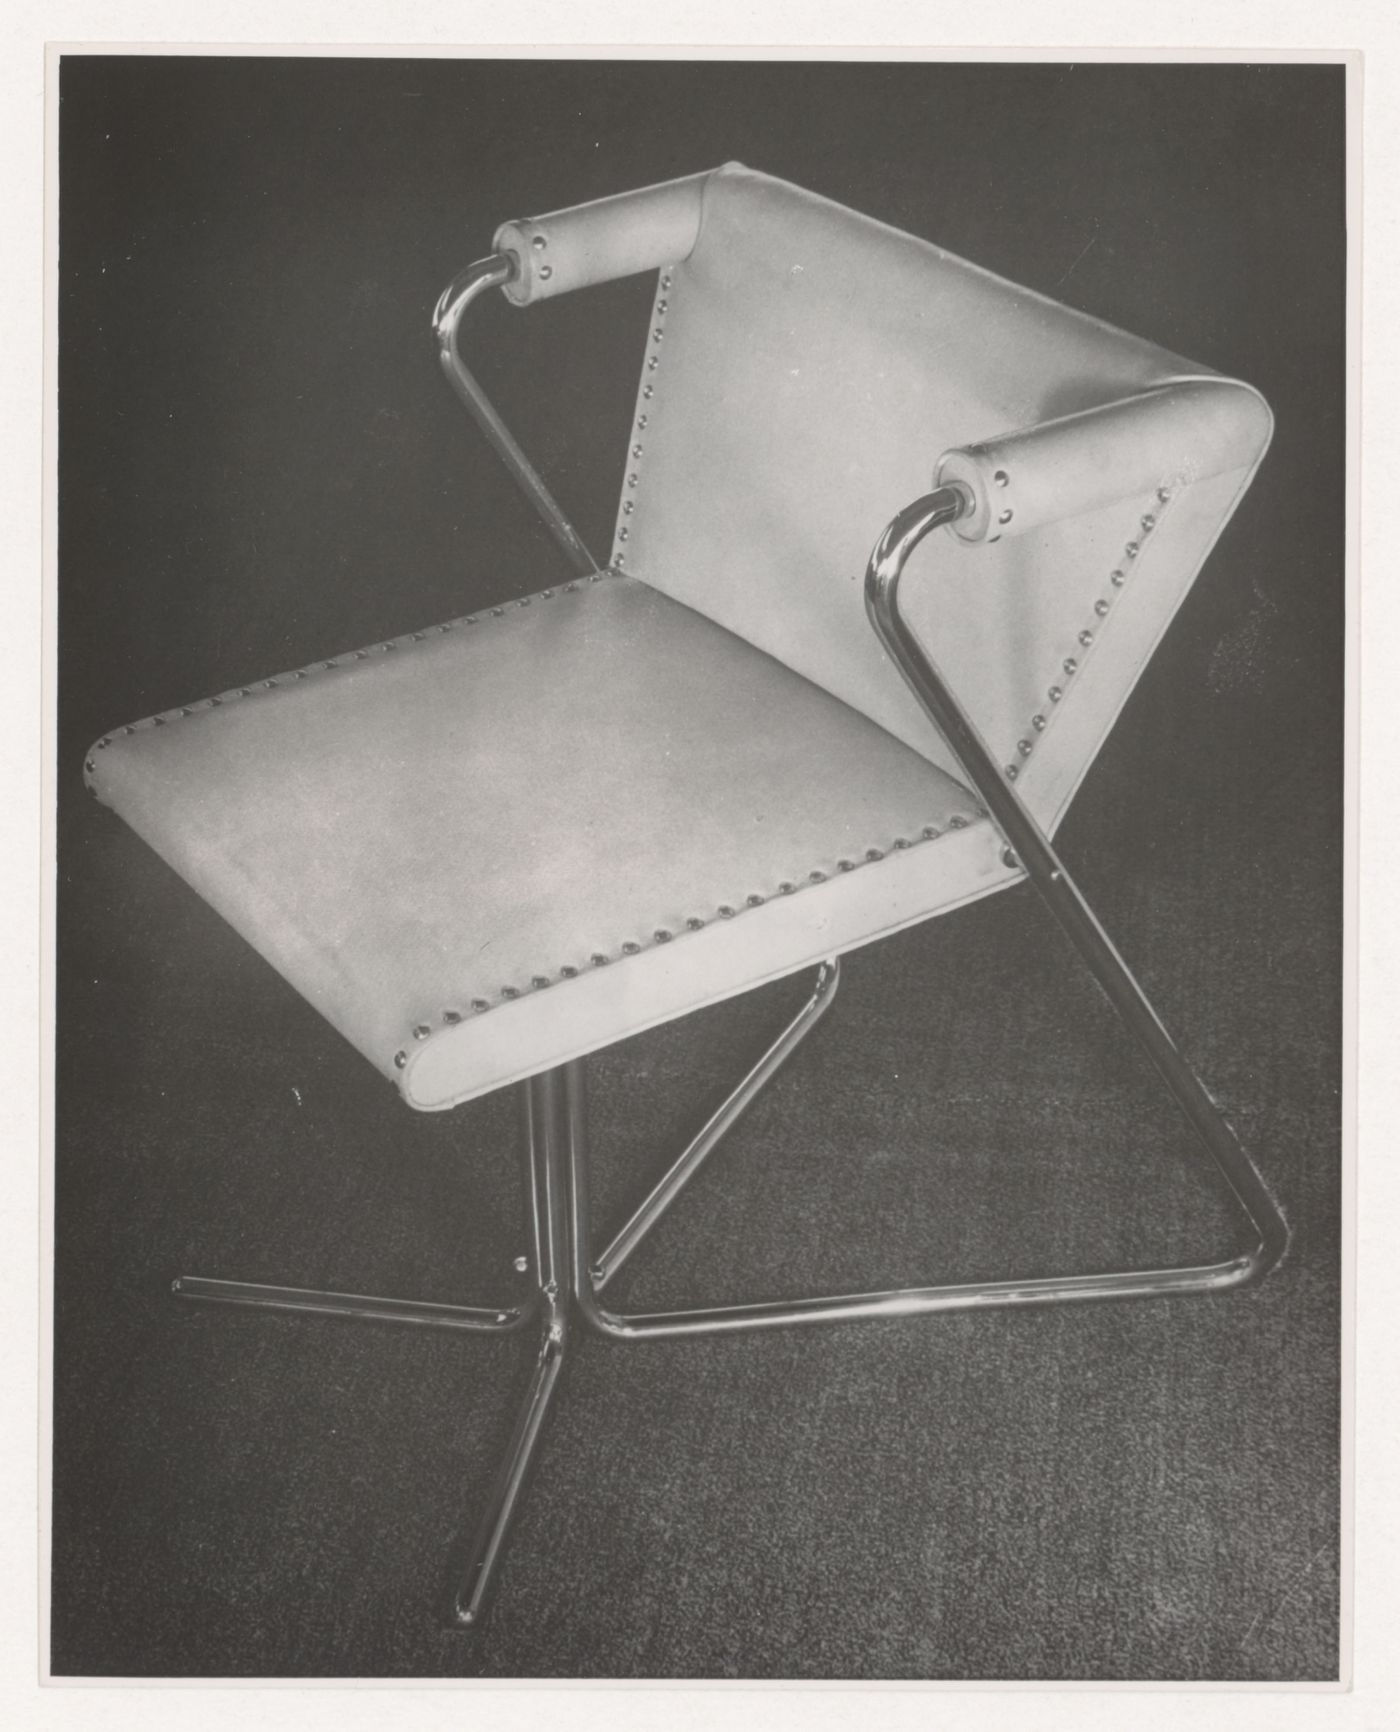 View of an office elbow chair designed by J.J.P. Oud for Metz & Co., Amsterdam, Netherlands